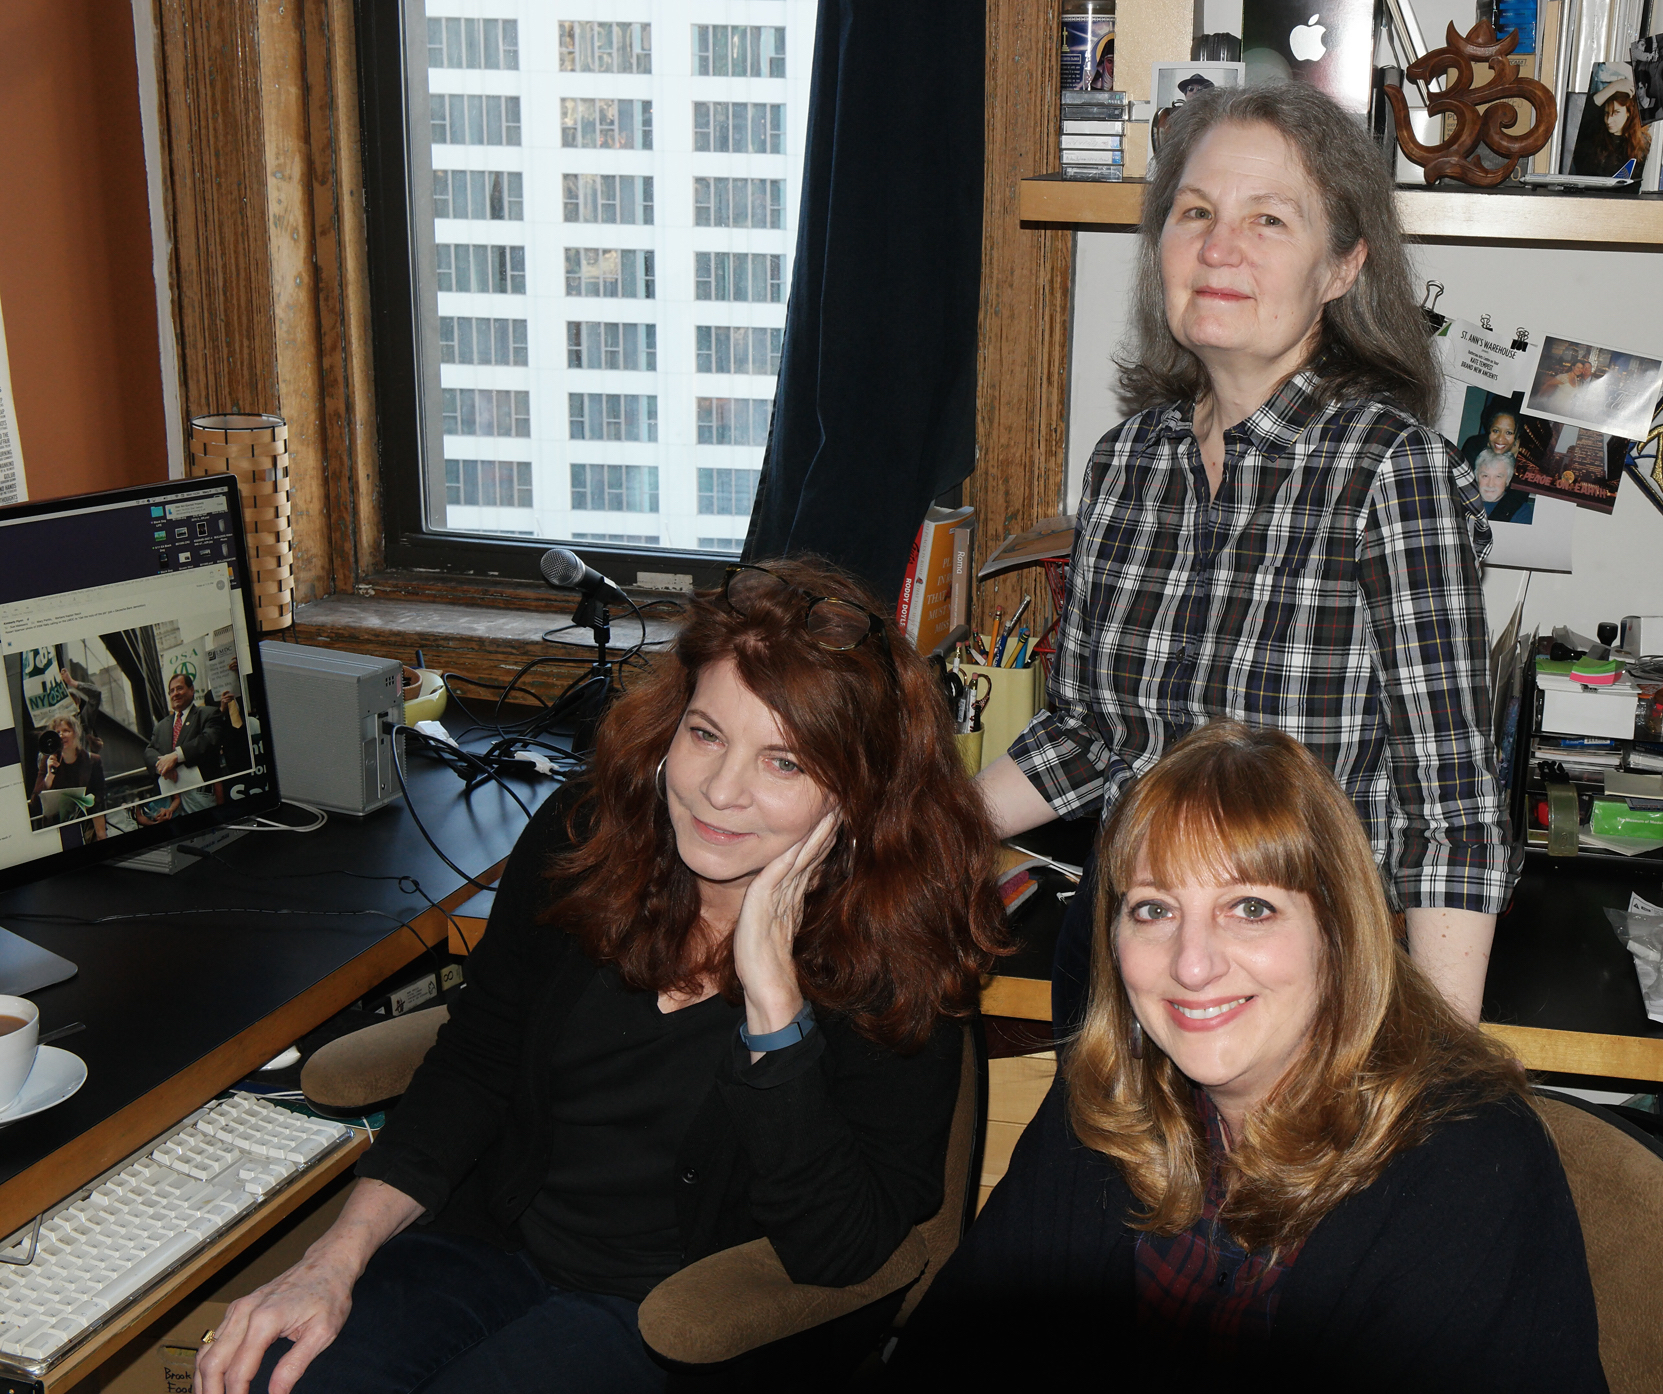 Mary Perillo, Kimberly Flynn, and Barbara Reich of 9/11 Environmental Action, working out of Perillo’s Cedar St. apartment, are continuing their efforts to enroll Downtowners who survived the 9/11 attacks in the healthcare and medical monitoring program recently given a new lease on life.